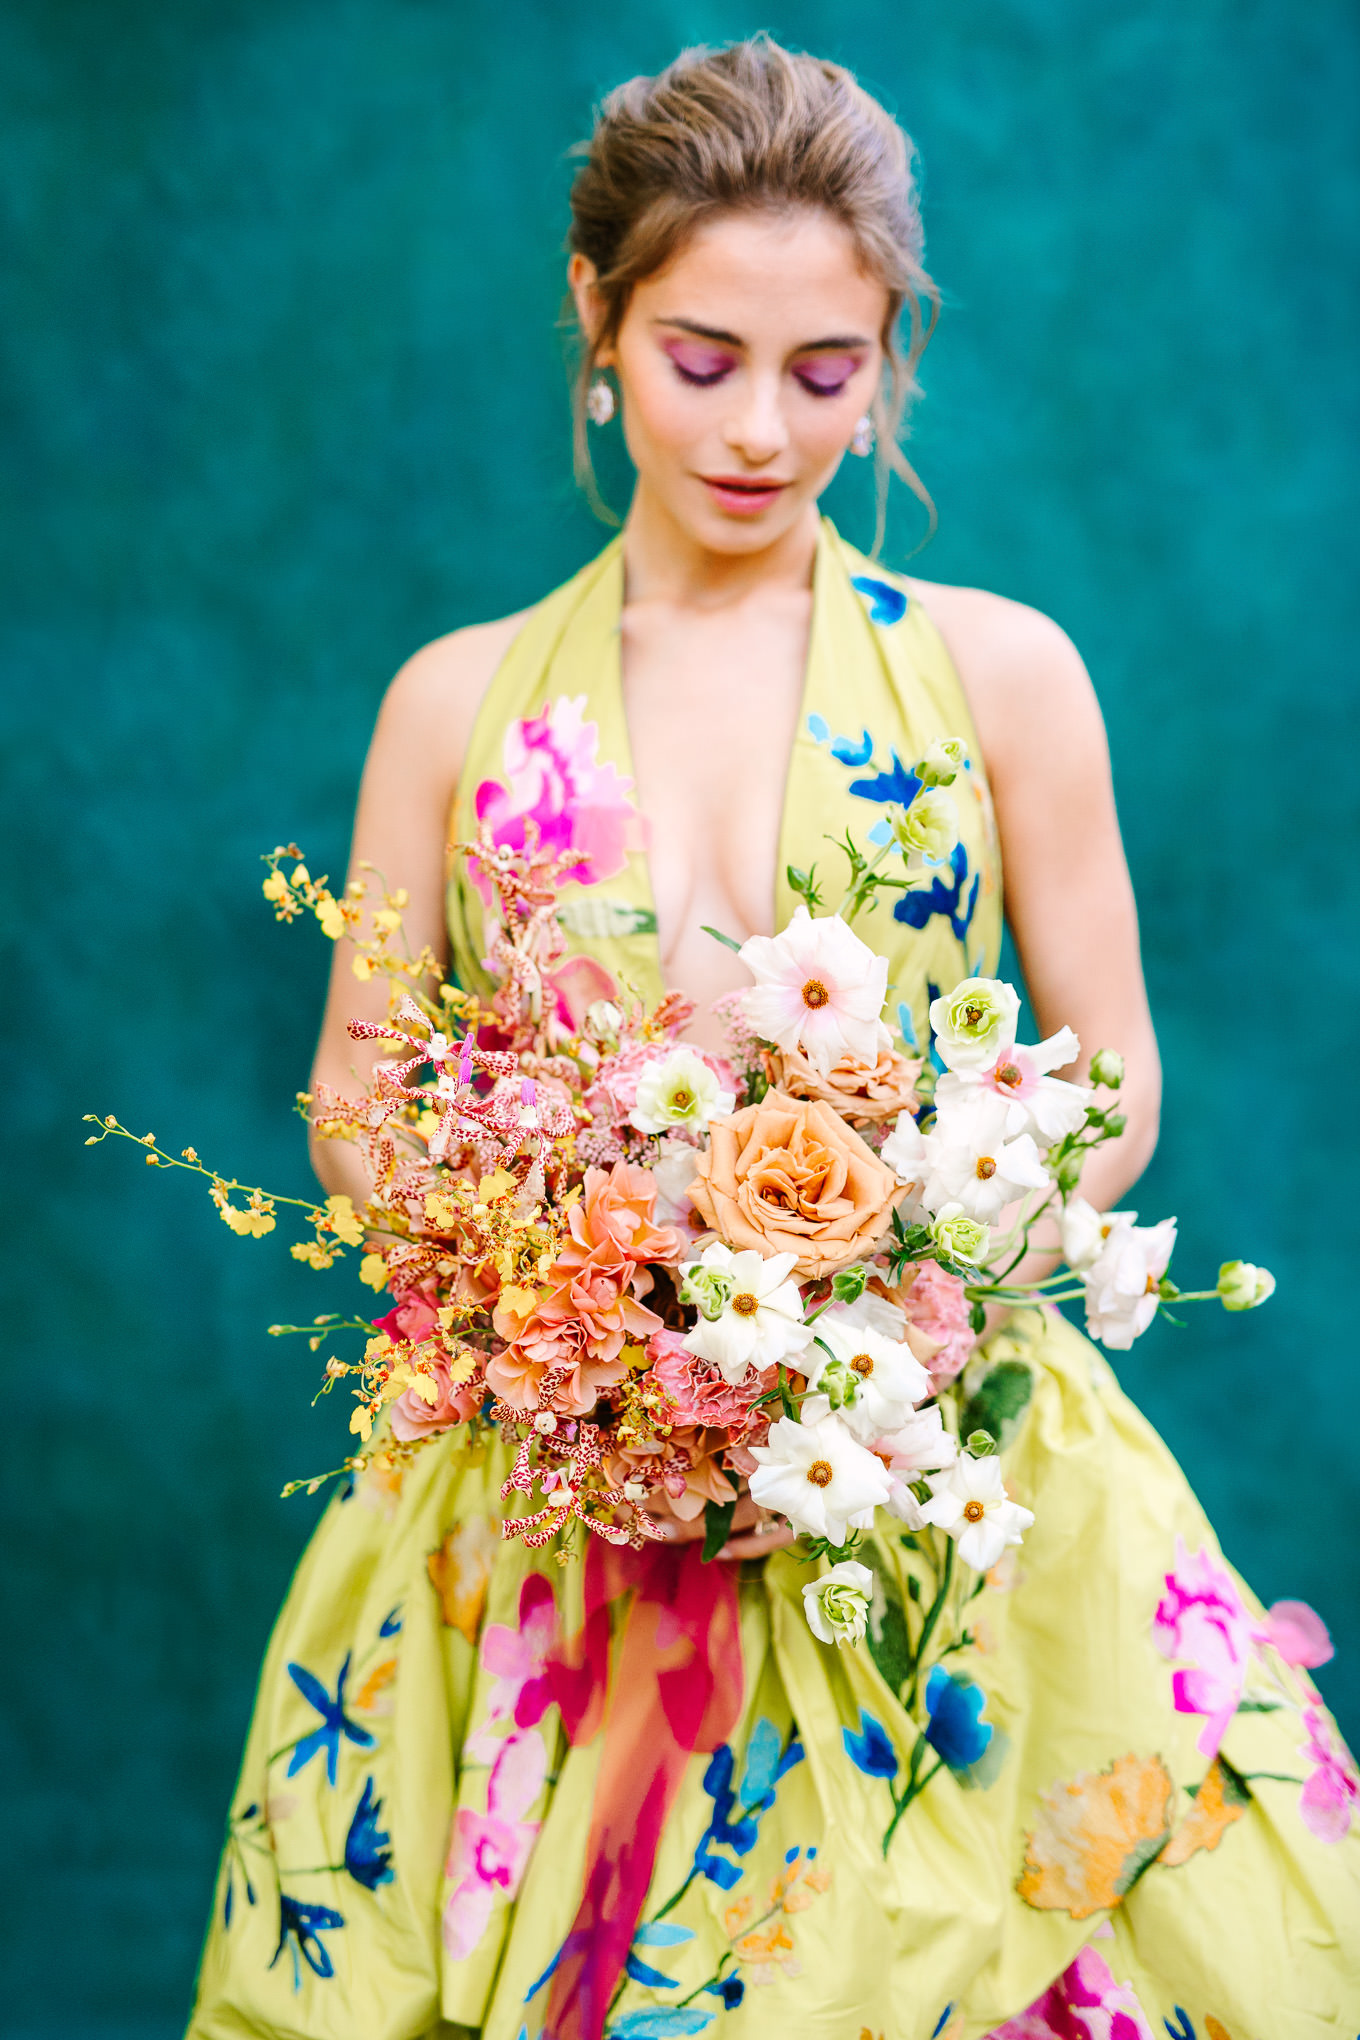 Chartreuse floral Marchesa gown on emerald painted backdrop | Kindred Presets x Mary Costa Photography Sands Hotel Ad Campaign | Colorful Palm Springs wedding photography | #palmspringsphotographer #lightroompresets #sandshotel #pinkhotel #kindredpresets  Source: Mary Costa Photography | Los Angeles